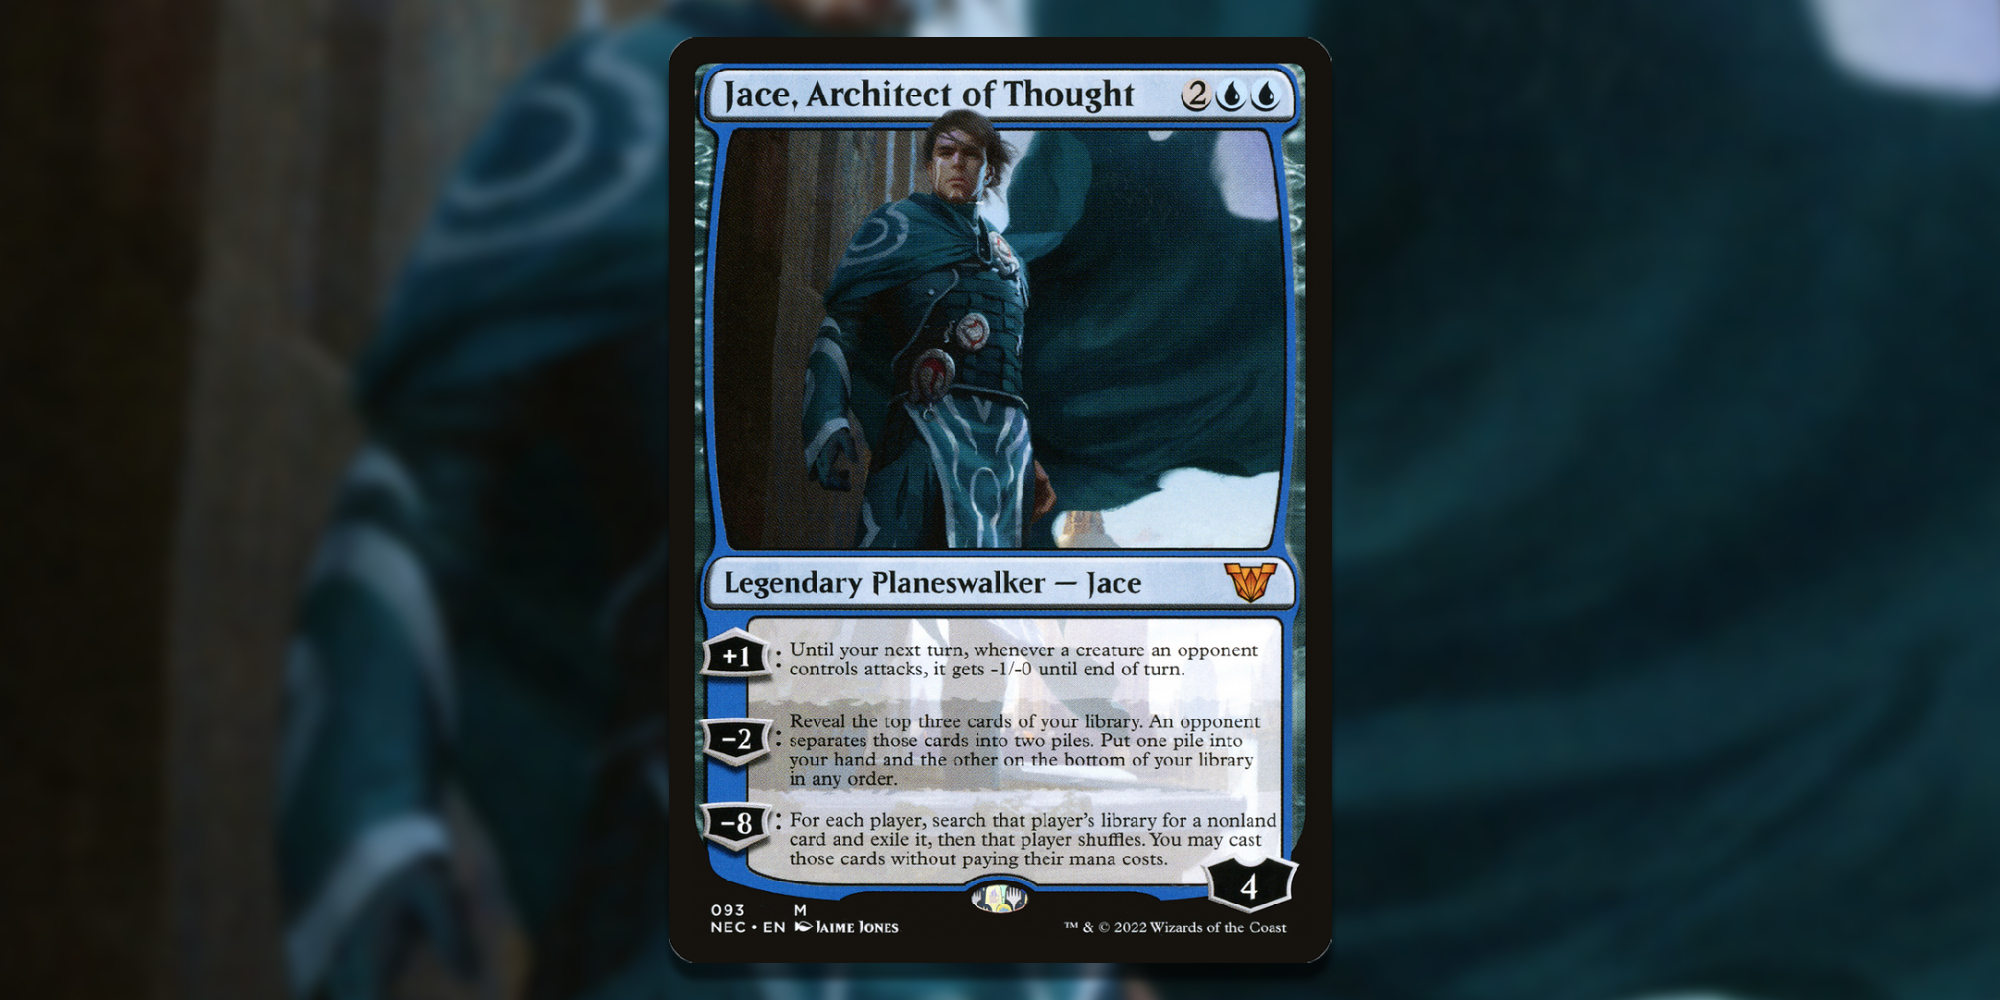 Card of Jace Architect of Thought over Art Background